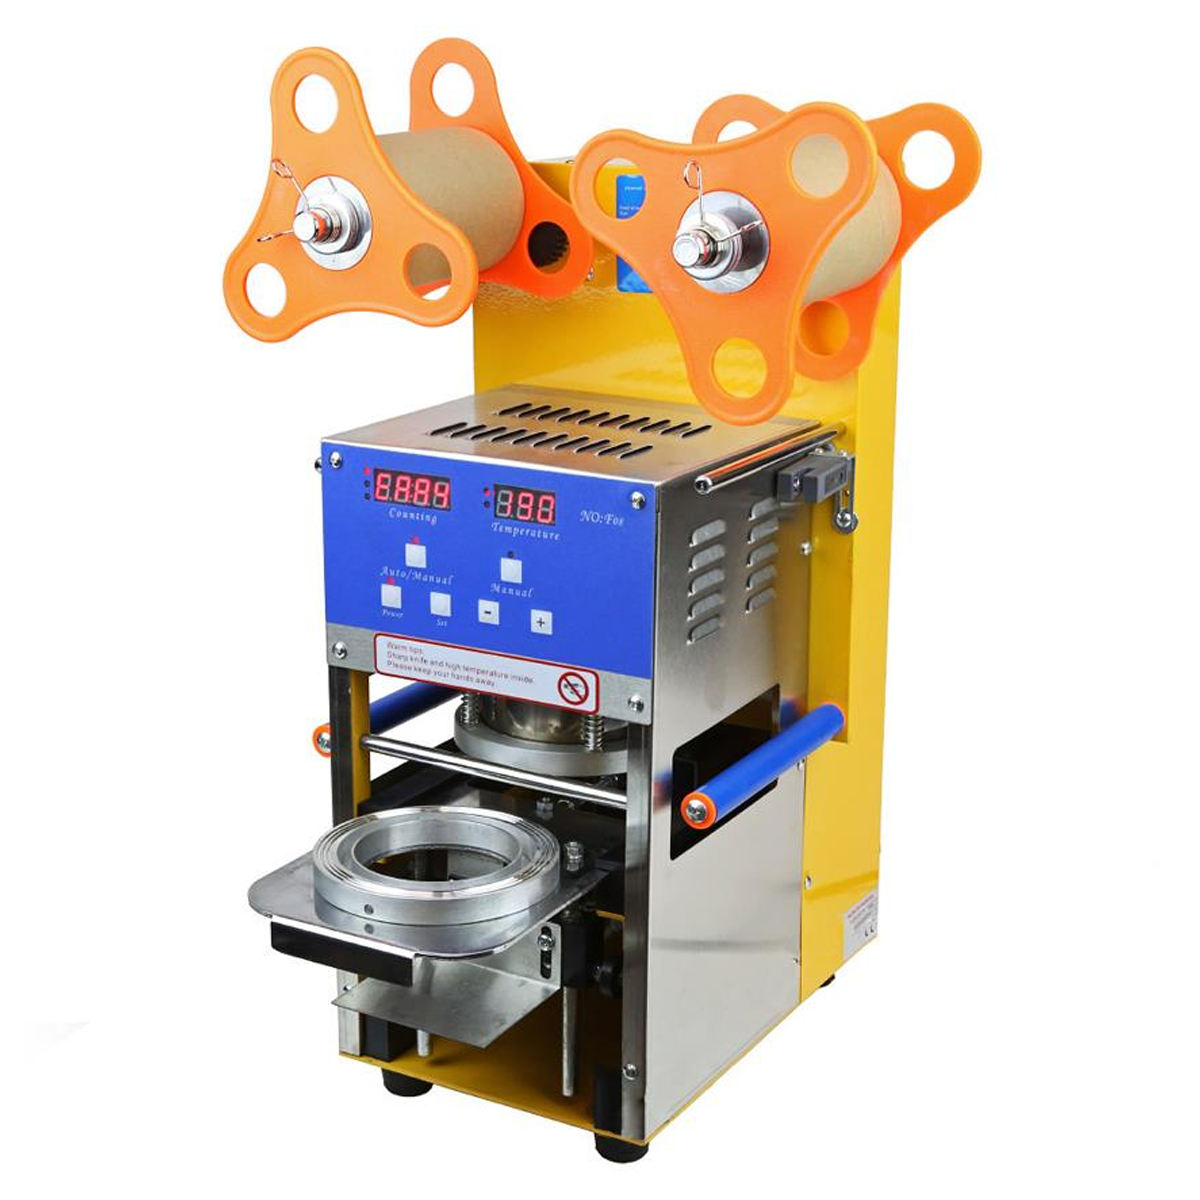 Fully automatic cup sealing machine/ cup sealer + 1 Free roll DES-QF08